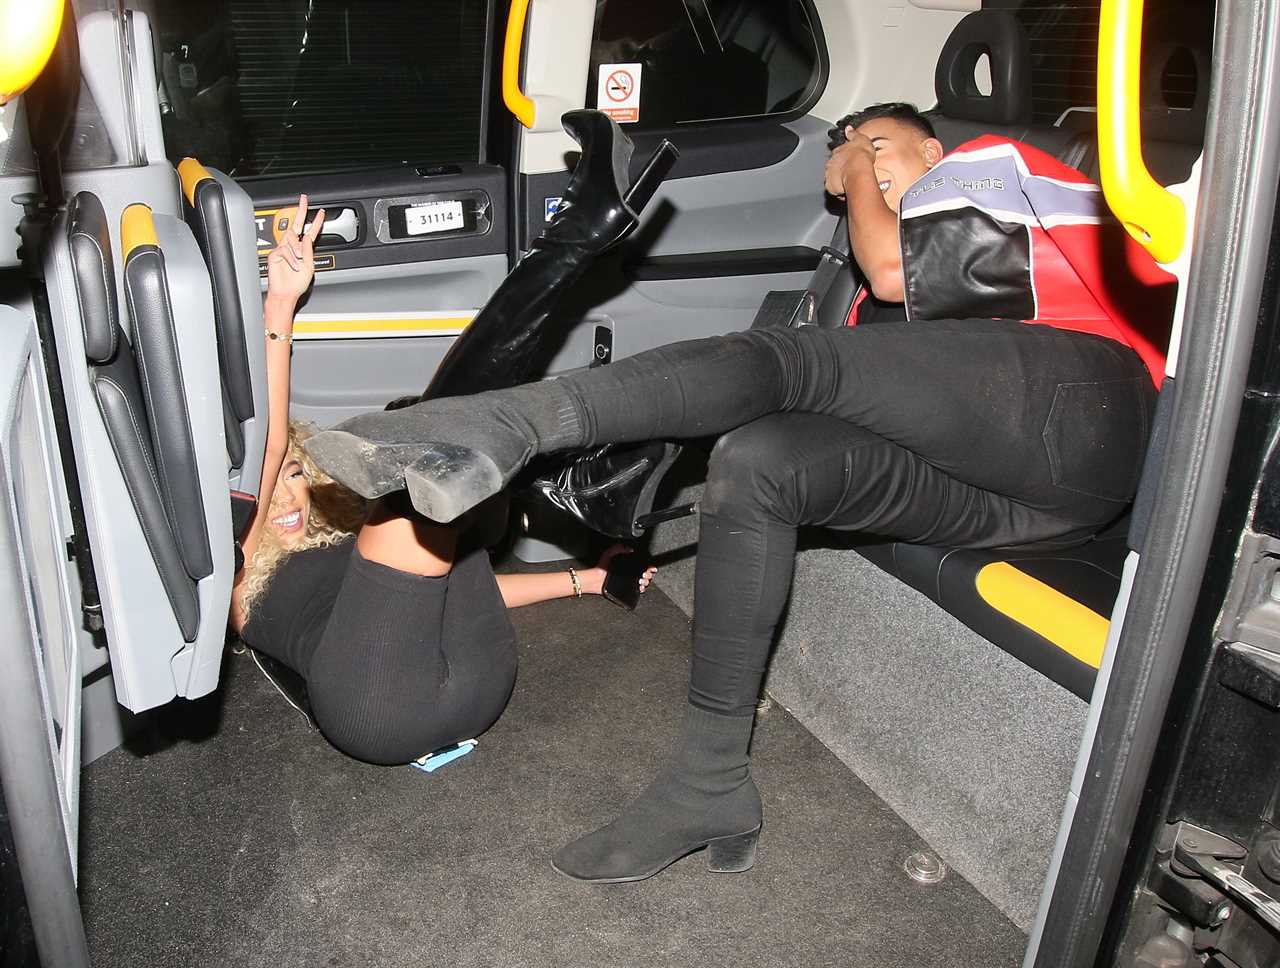 Towie star Dani Imbert takes a tumble outside London nightclub after twerking with pal